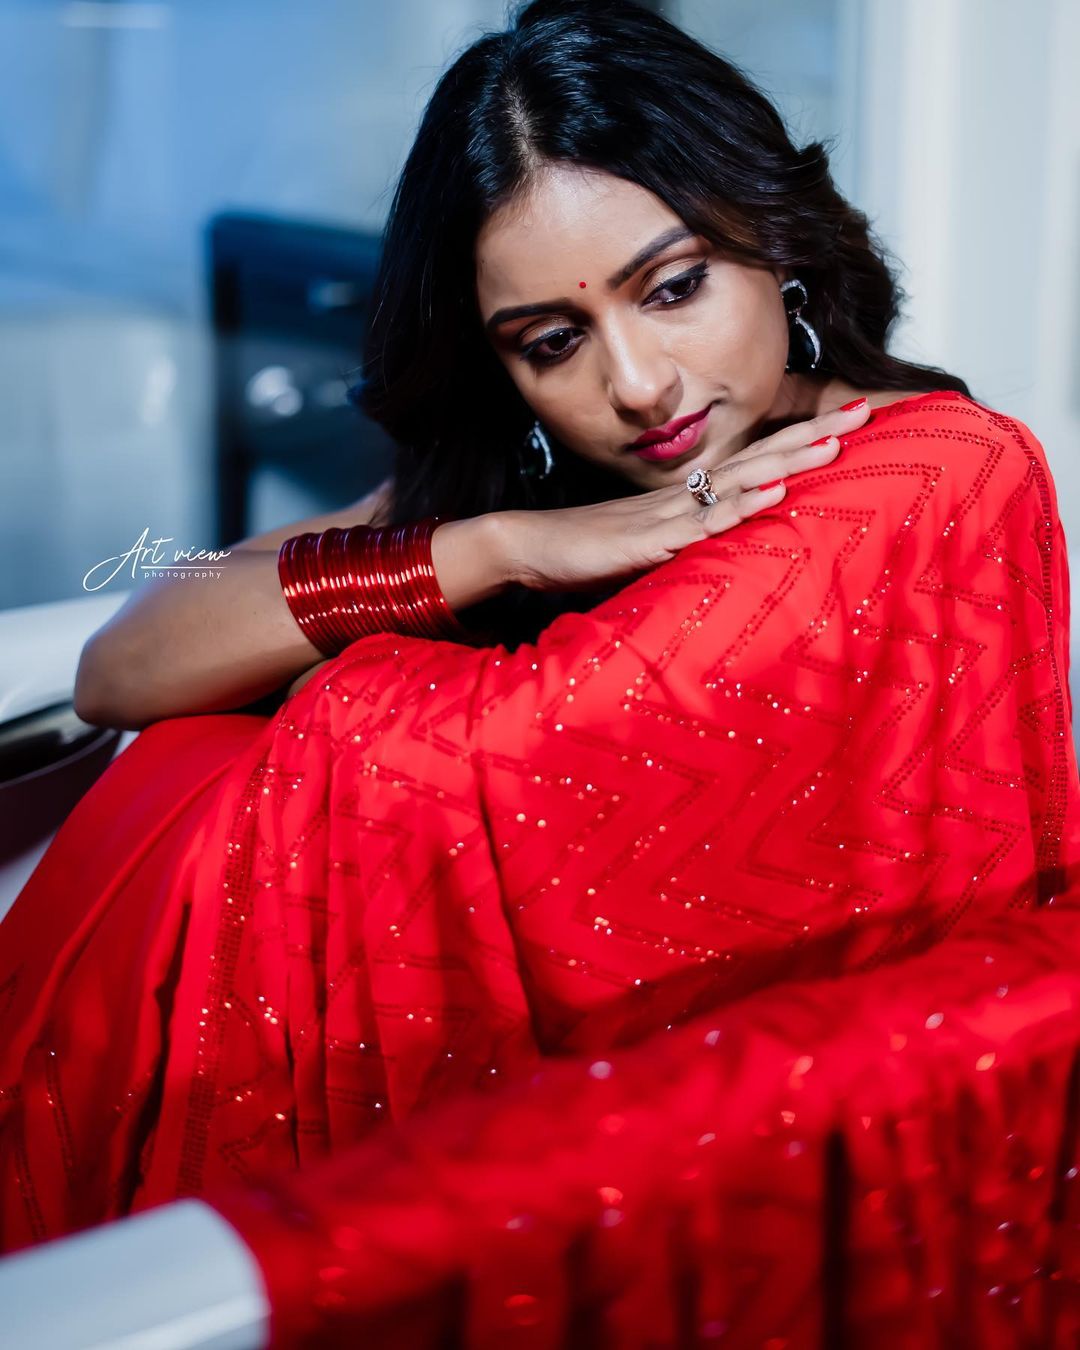 Actress vithika sheru sets hearts racing with her beautiful pictures-Actressvithika, Vithika Sheru Photos,Spicy Hot Pics,Images,High Resolution WallPapers Download